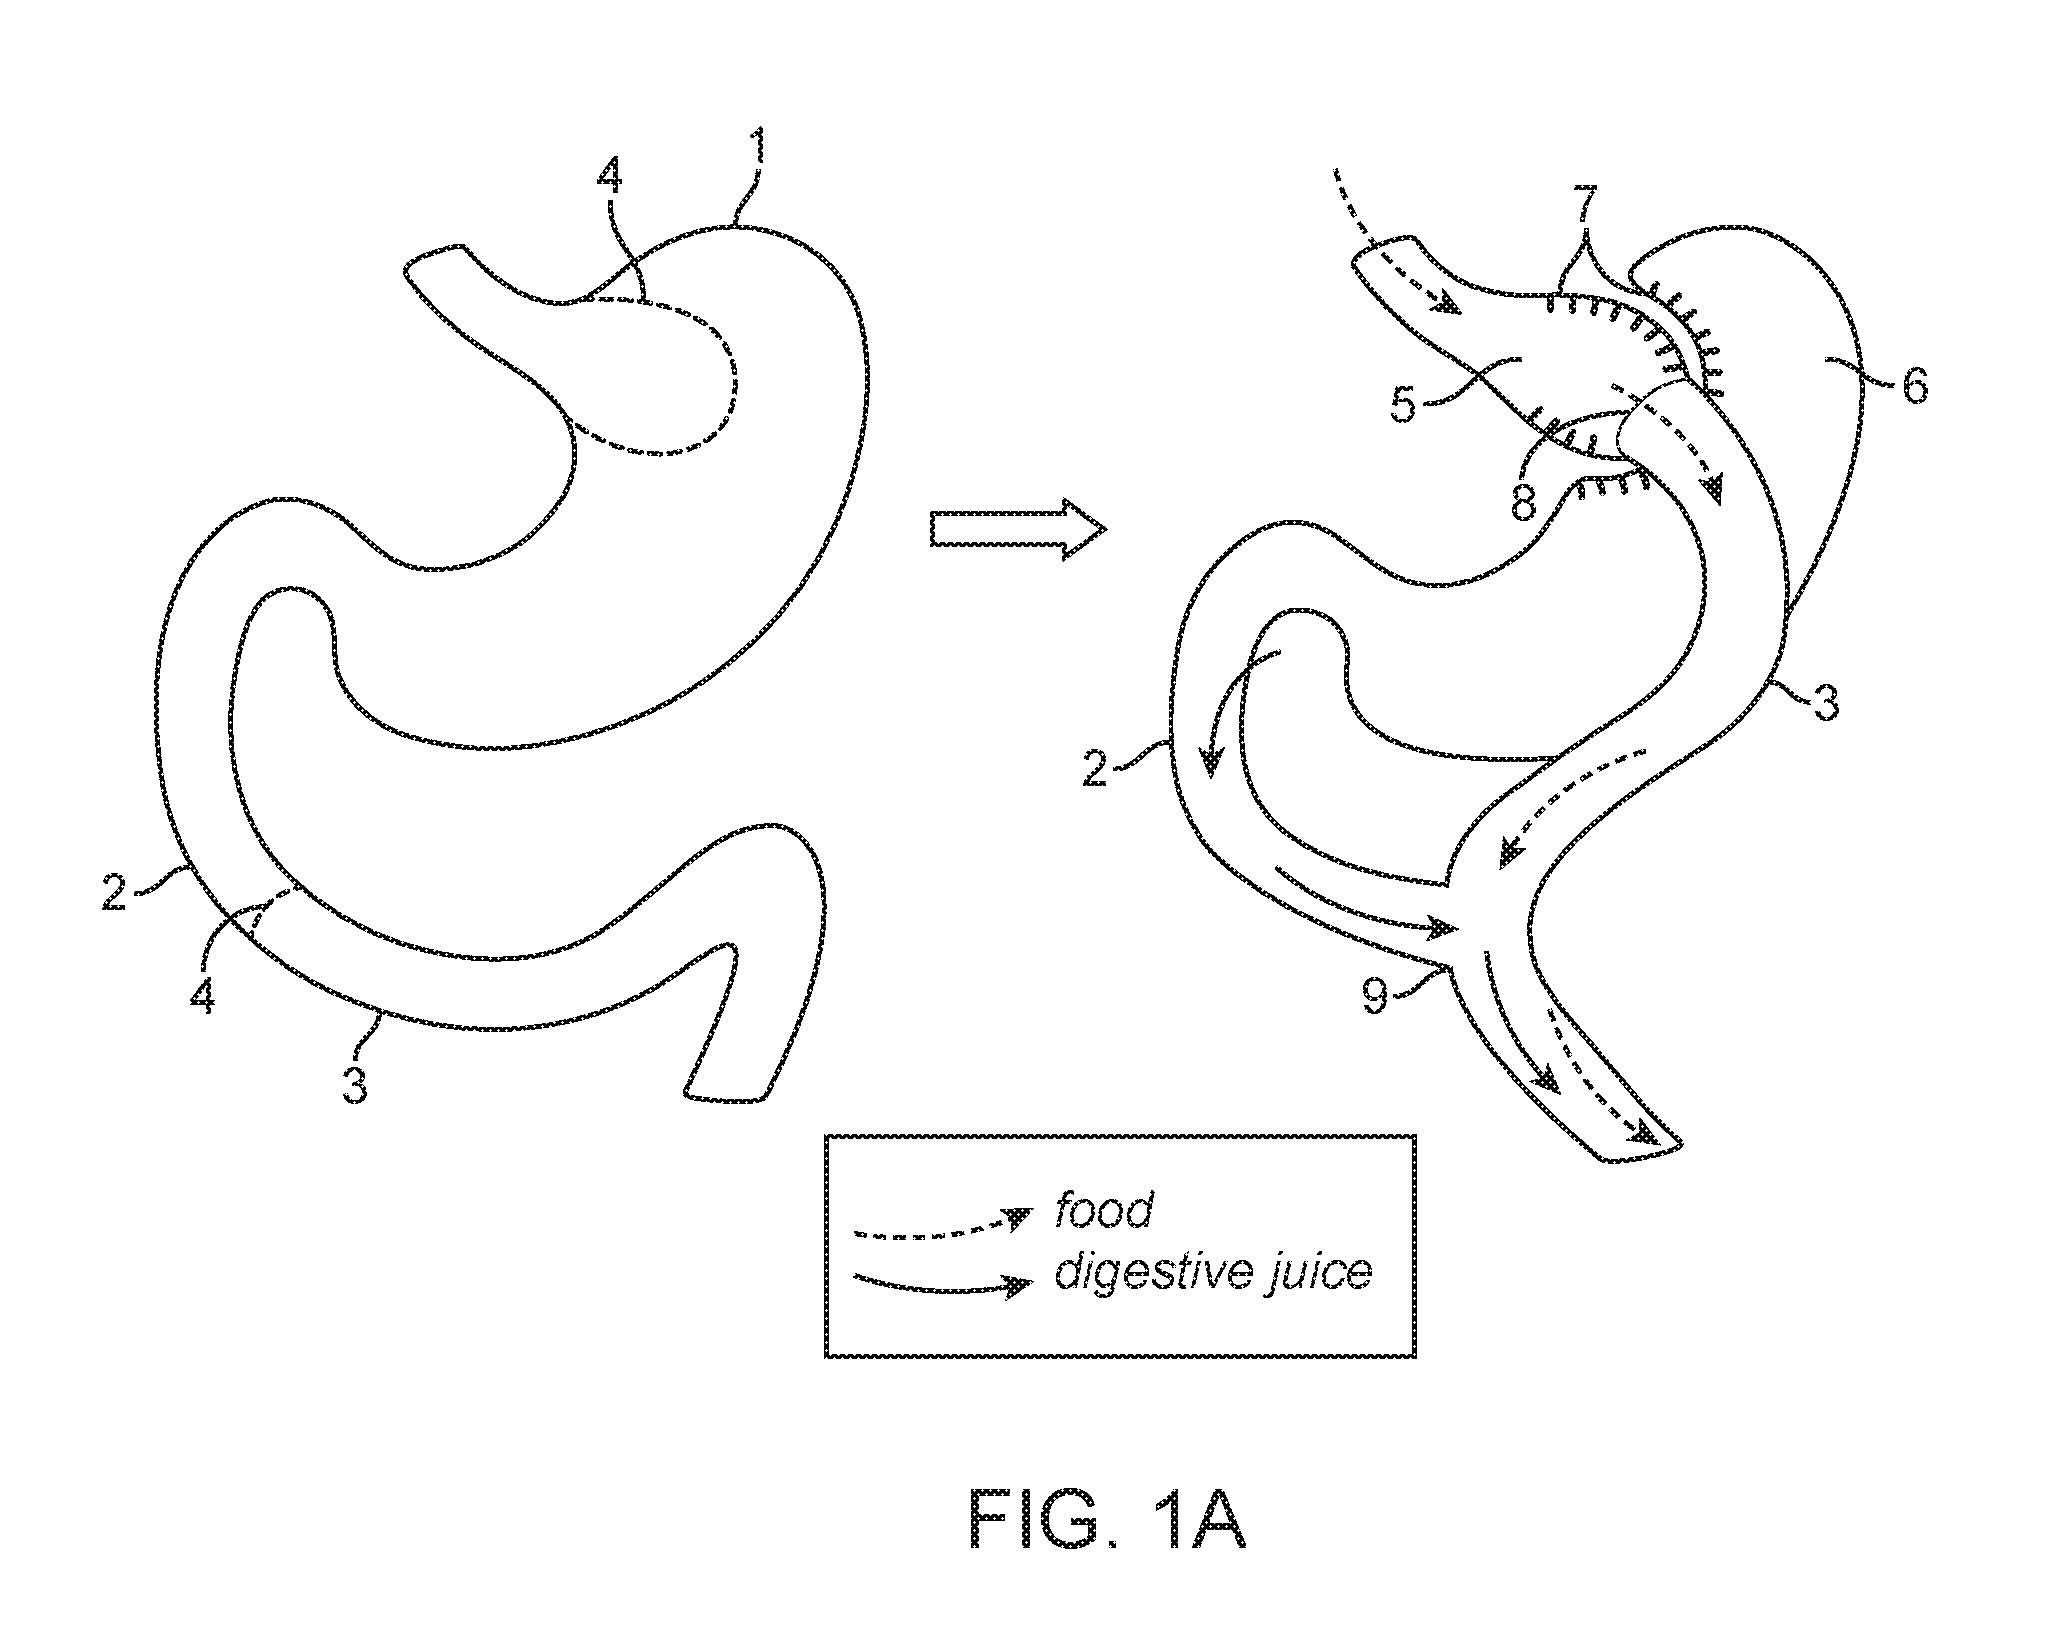 Devices and methods for forming an anastomosis